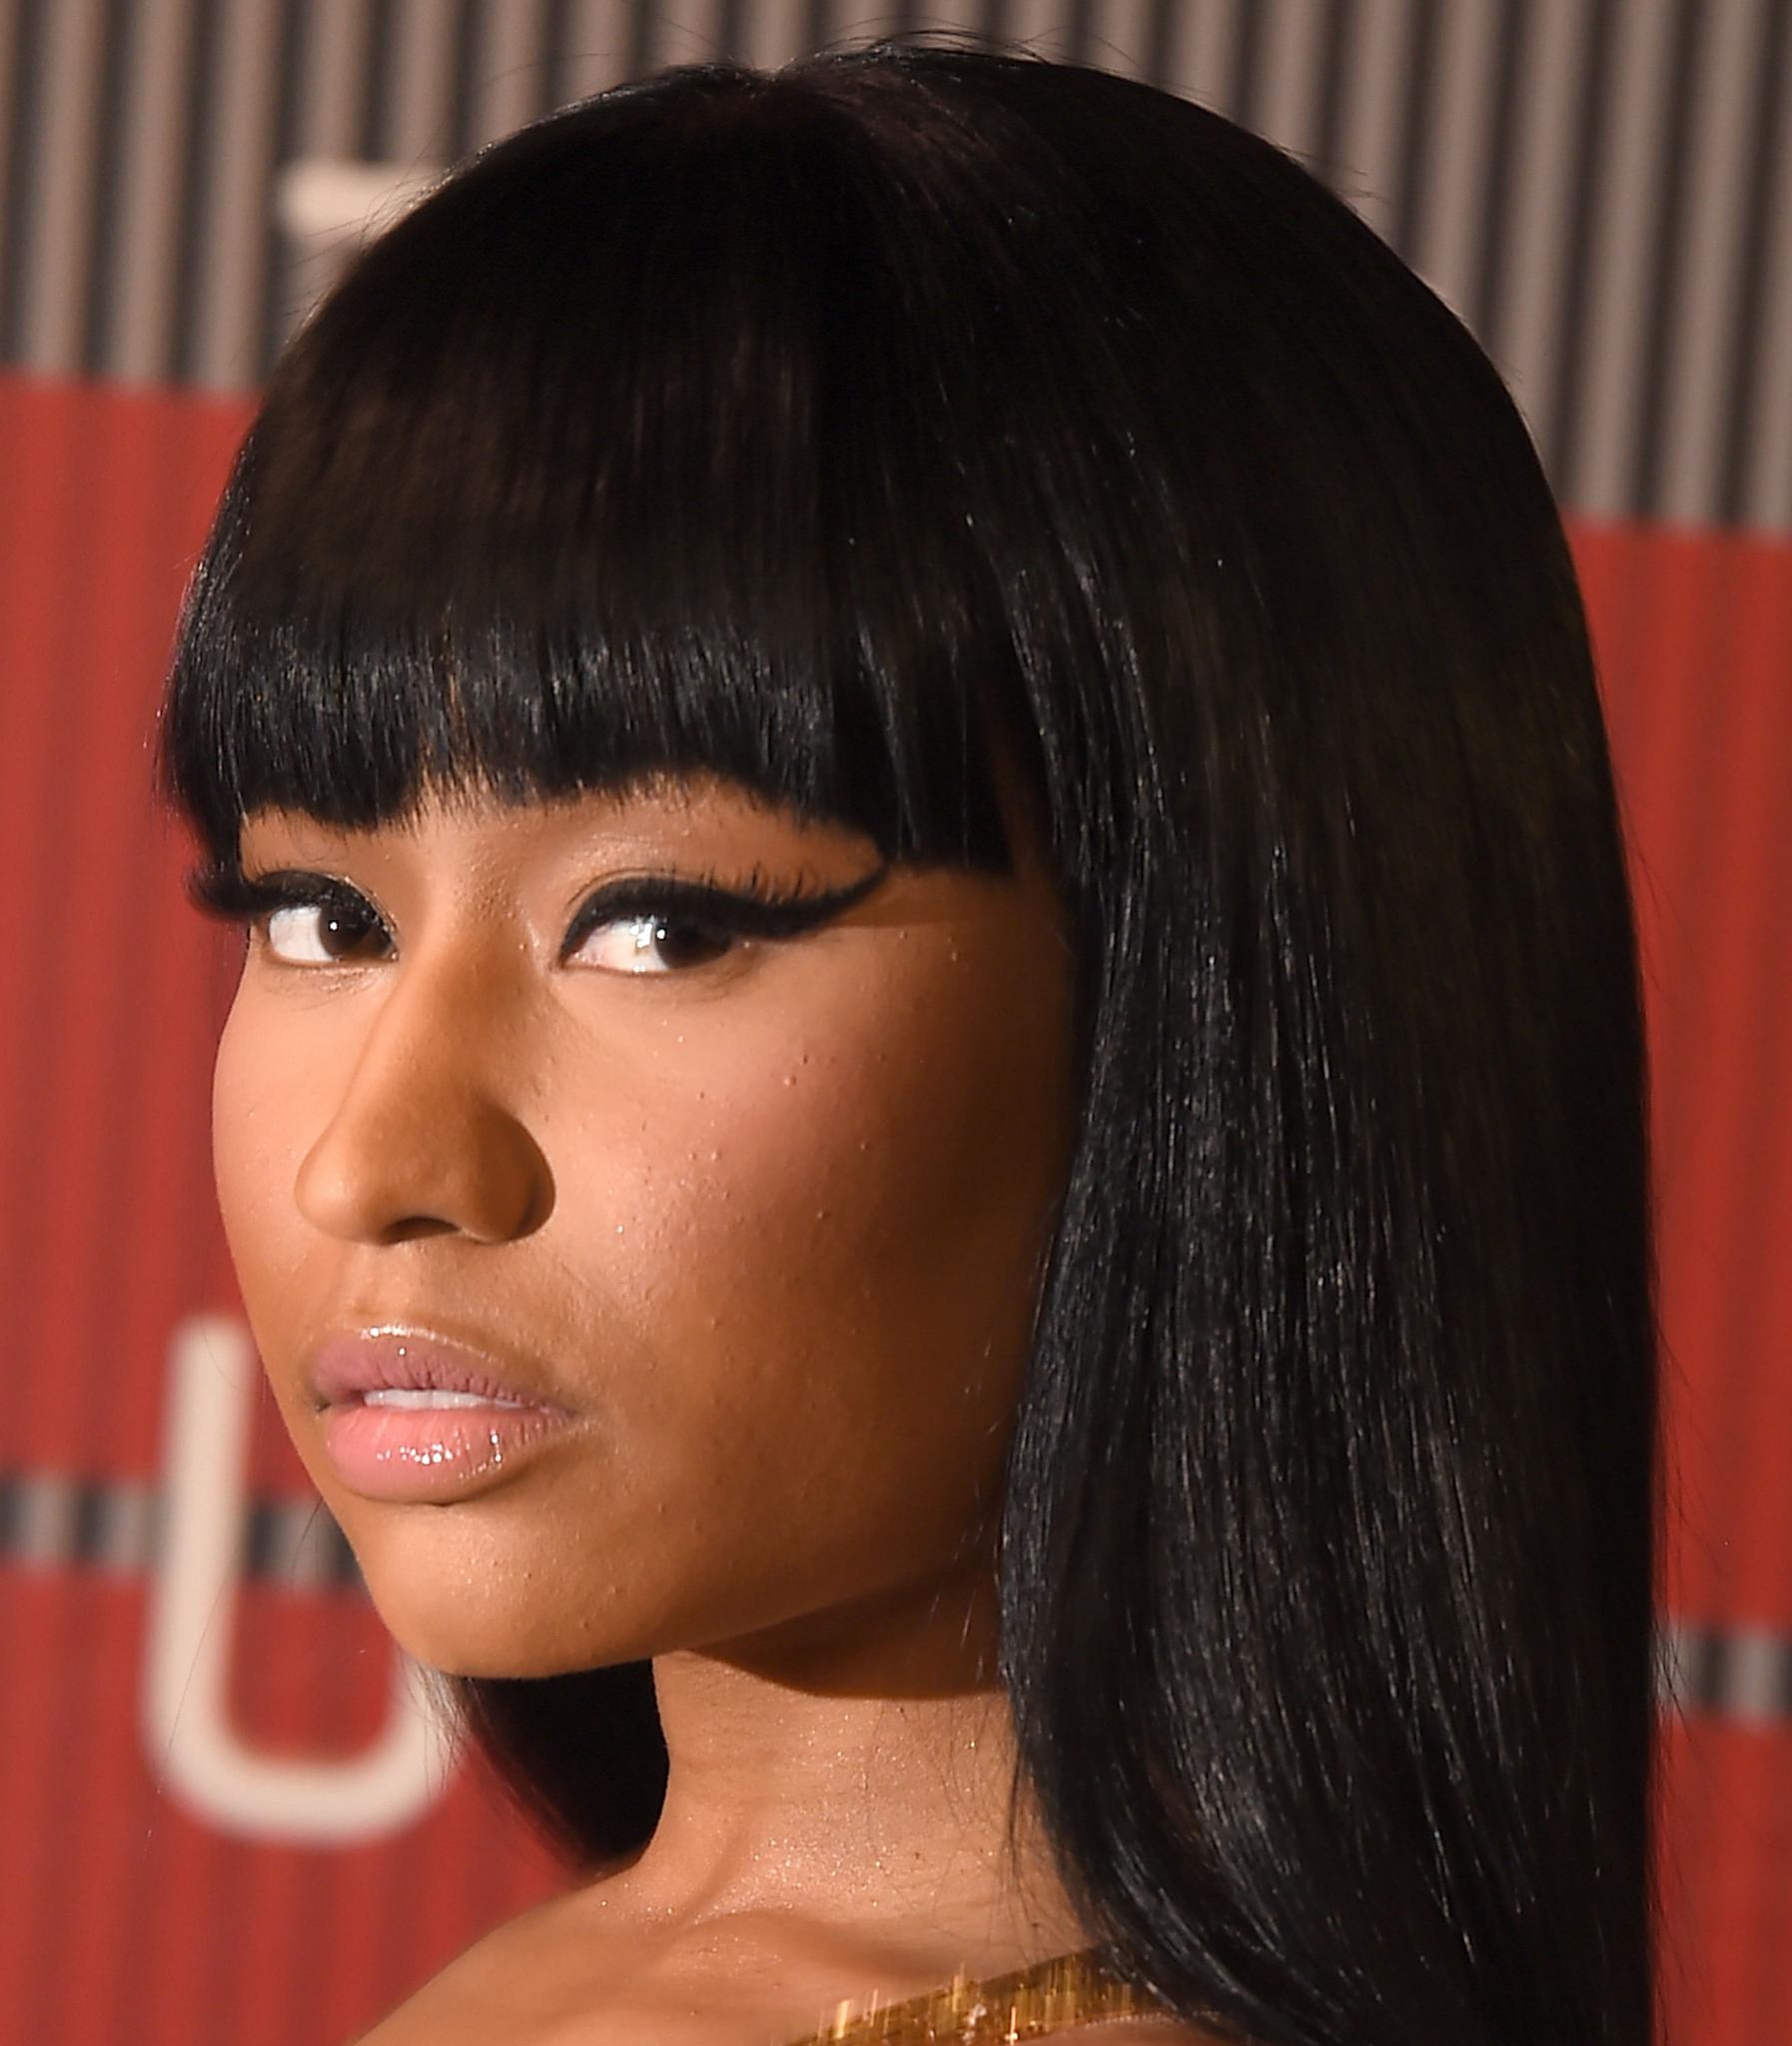 Nicki Minaj Explains Why She Is Unapologetic About Calling Out Miley Cyrus at VMAs